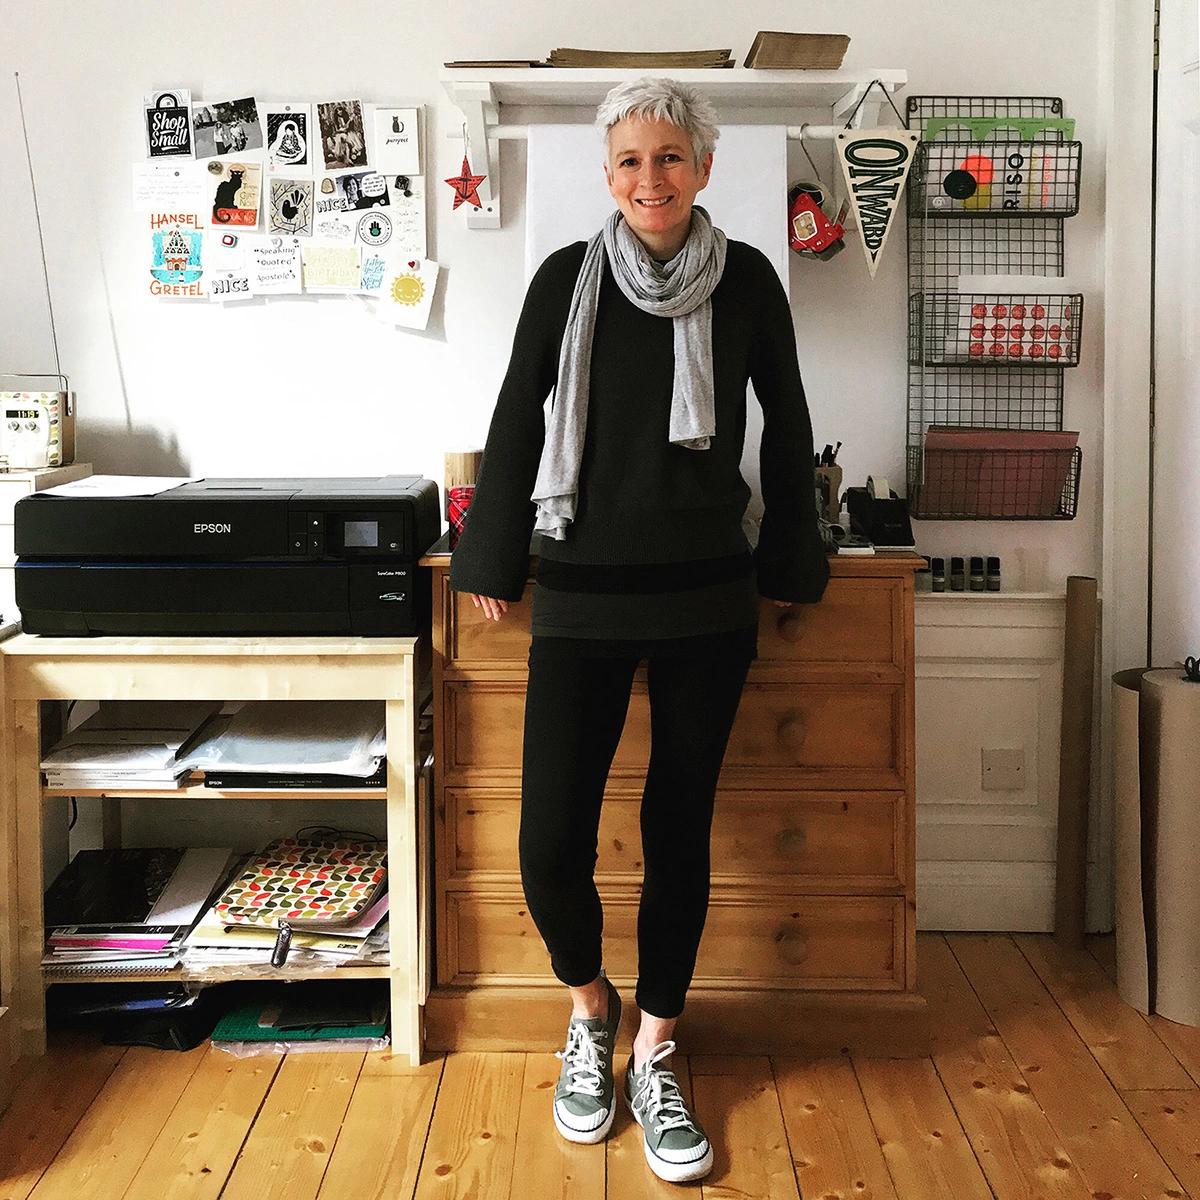 woman with white hair dressed in black clothes and a grey scarf in Edinburgh art studio with wooden floors and art studio equipment